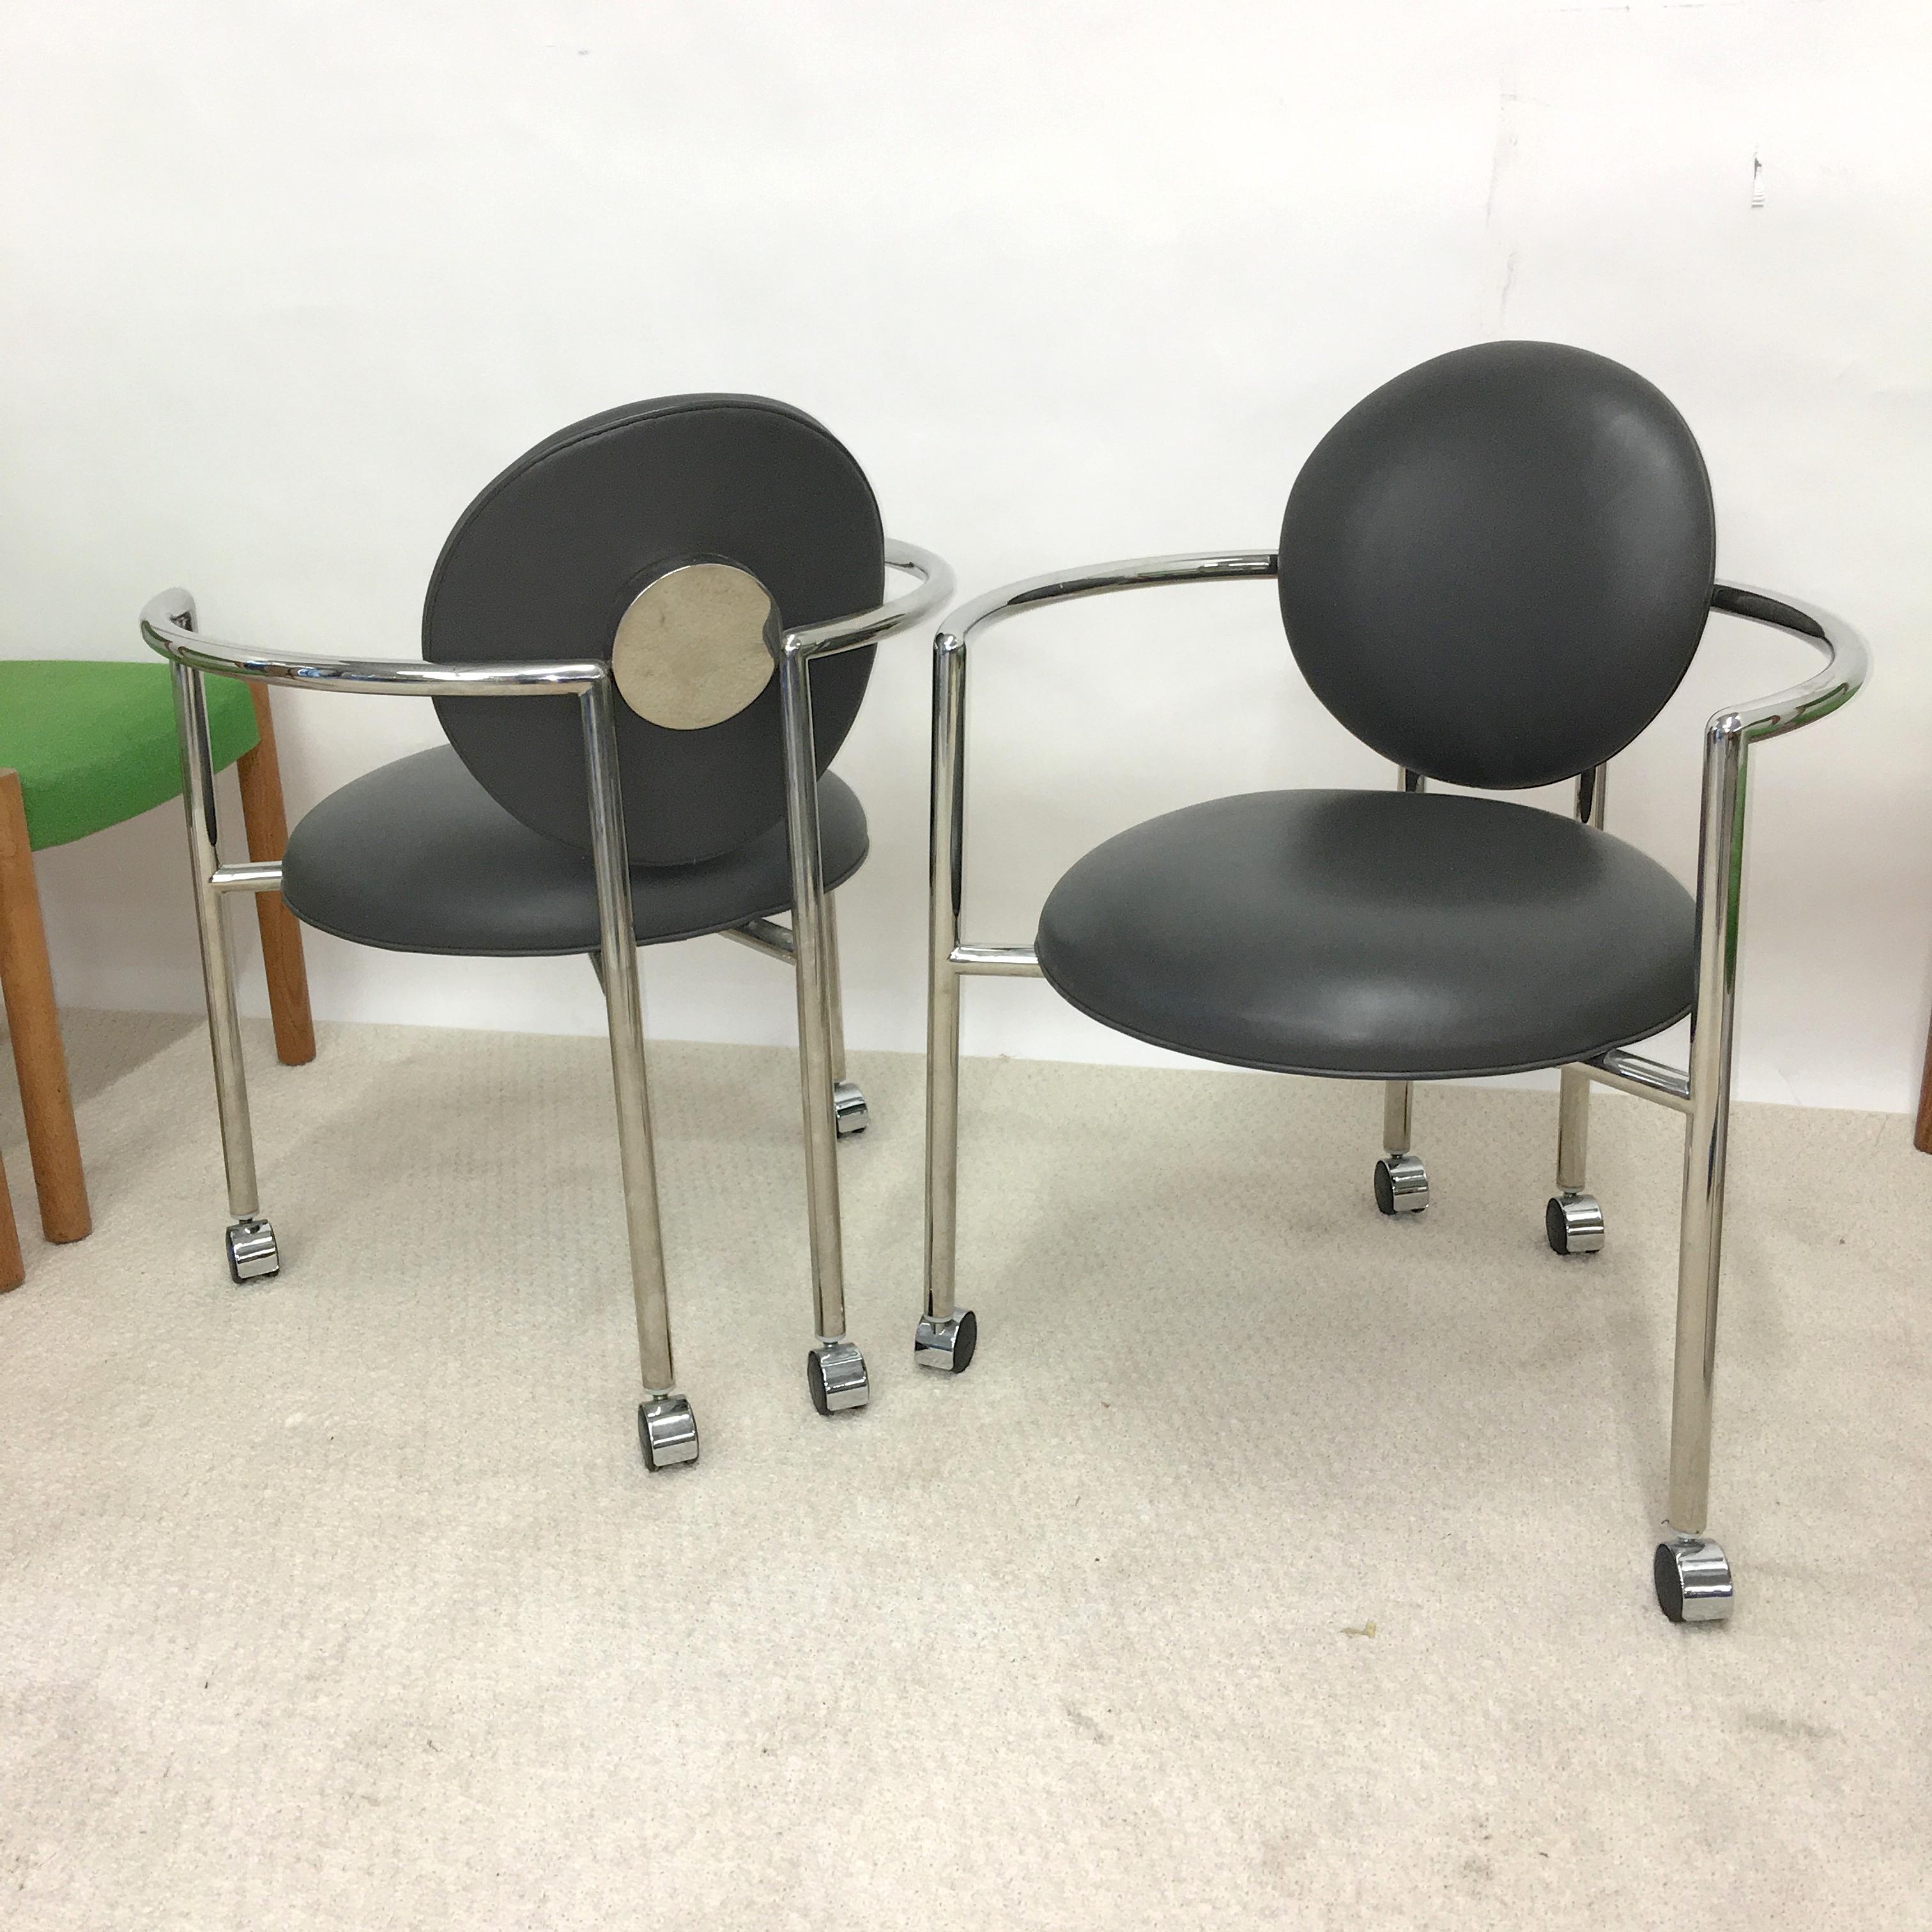 Pair of Moon Chairs by Stanley Jay Friedman for Brueton 1